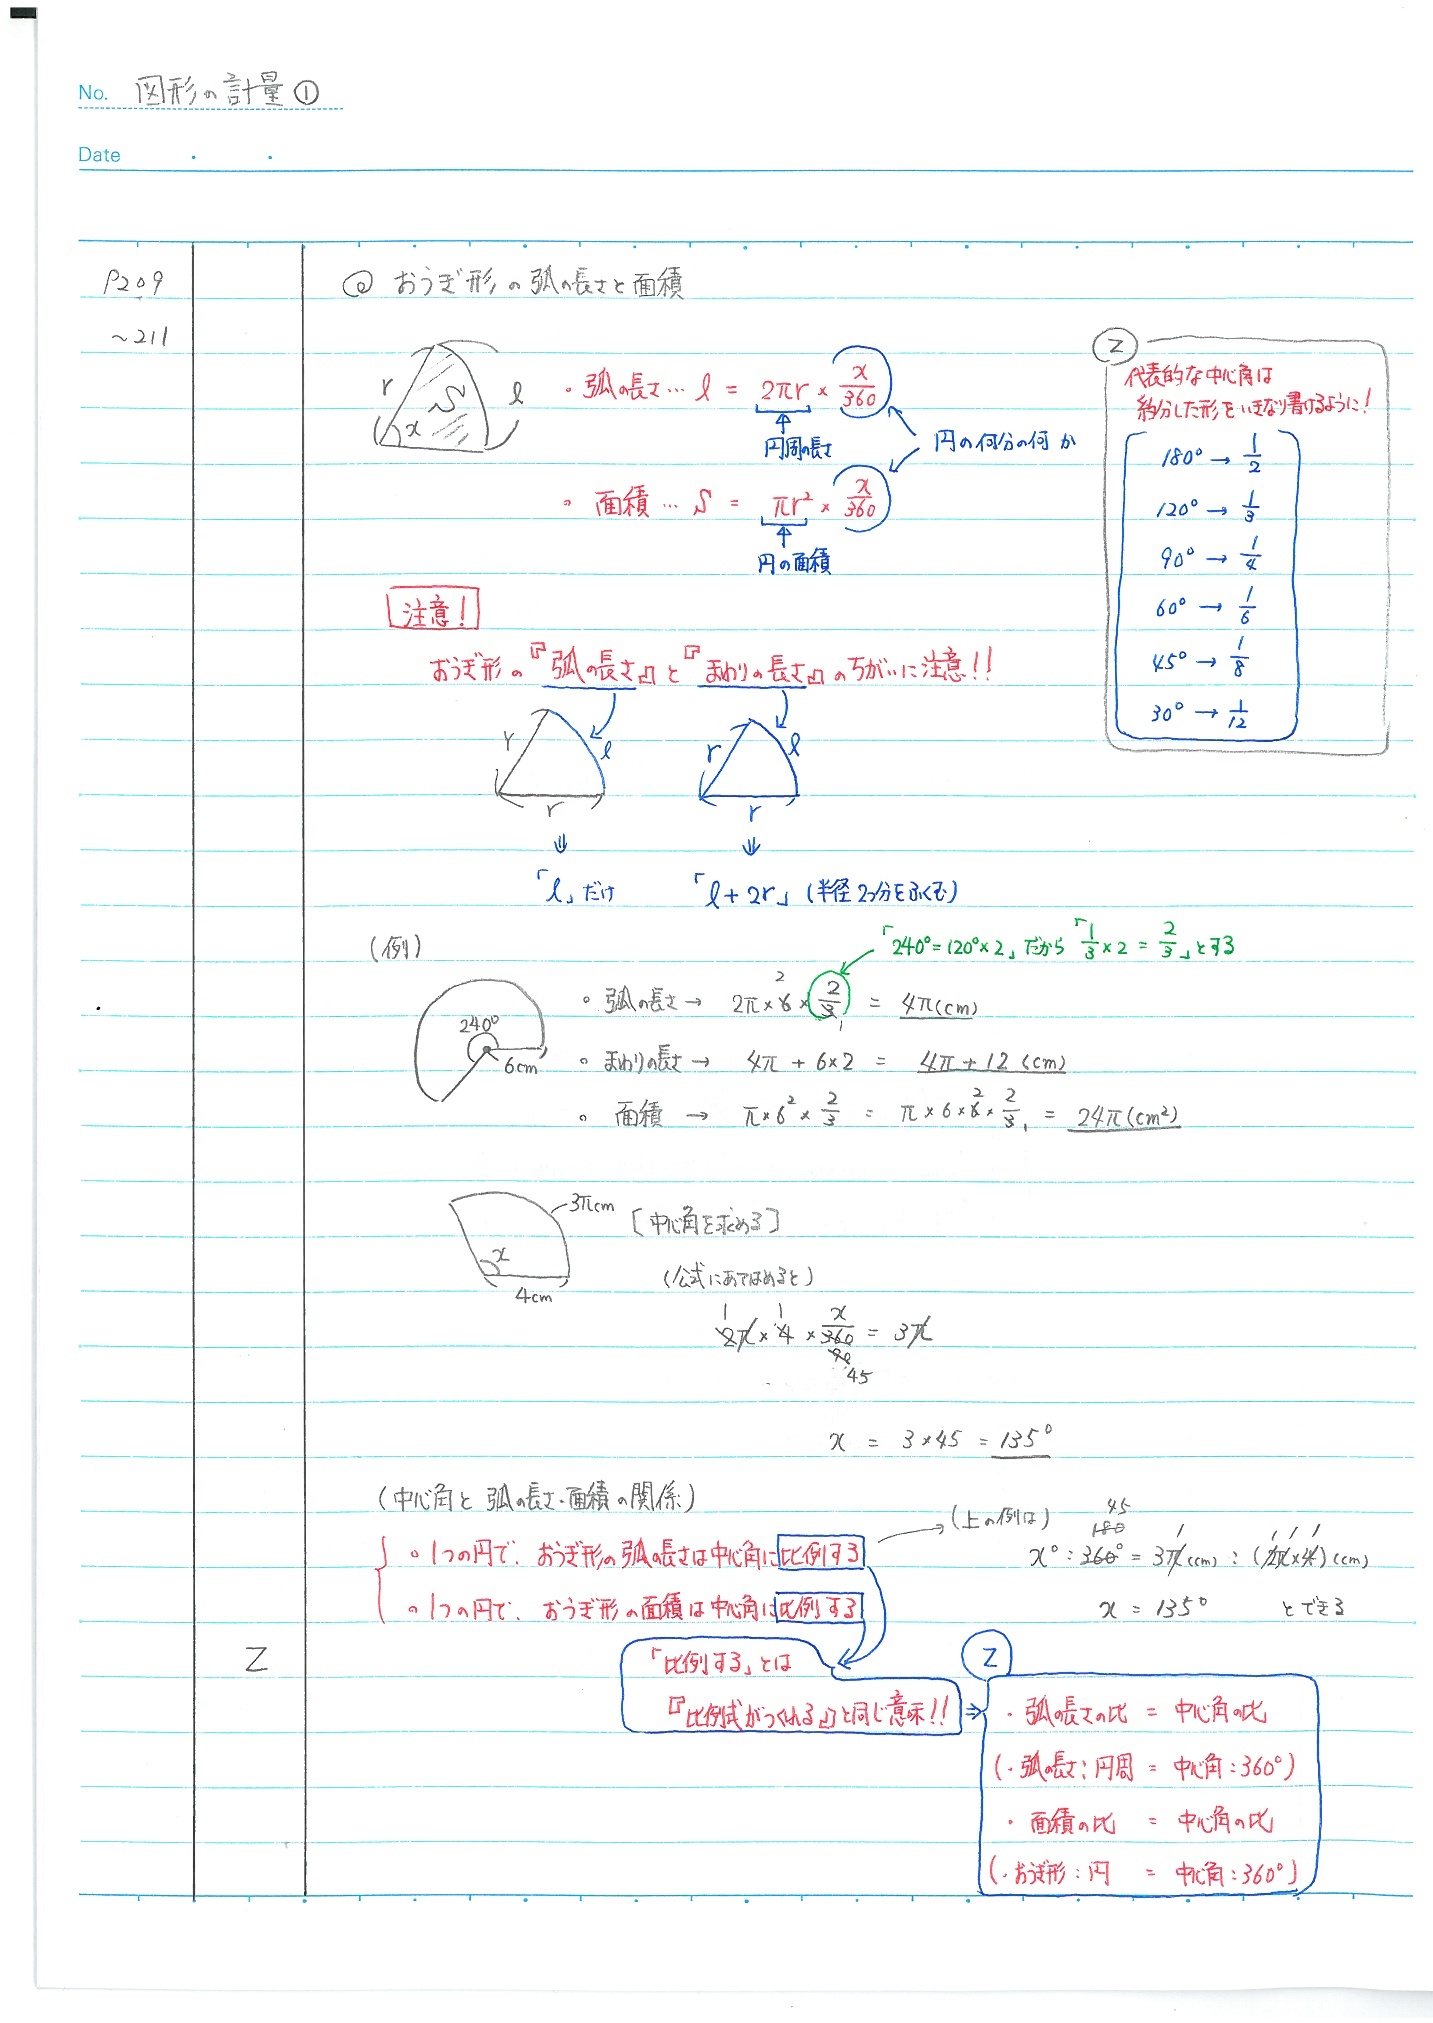 Category ノート 数学 Japaneseclass Jp